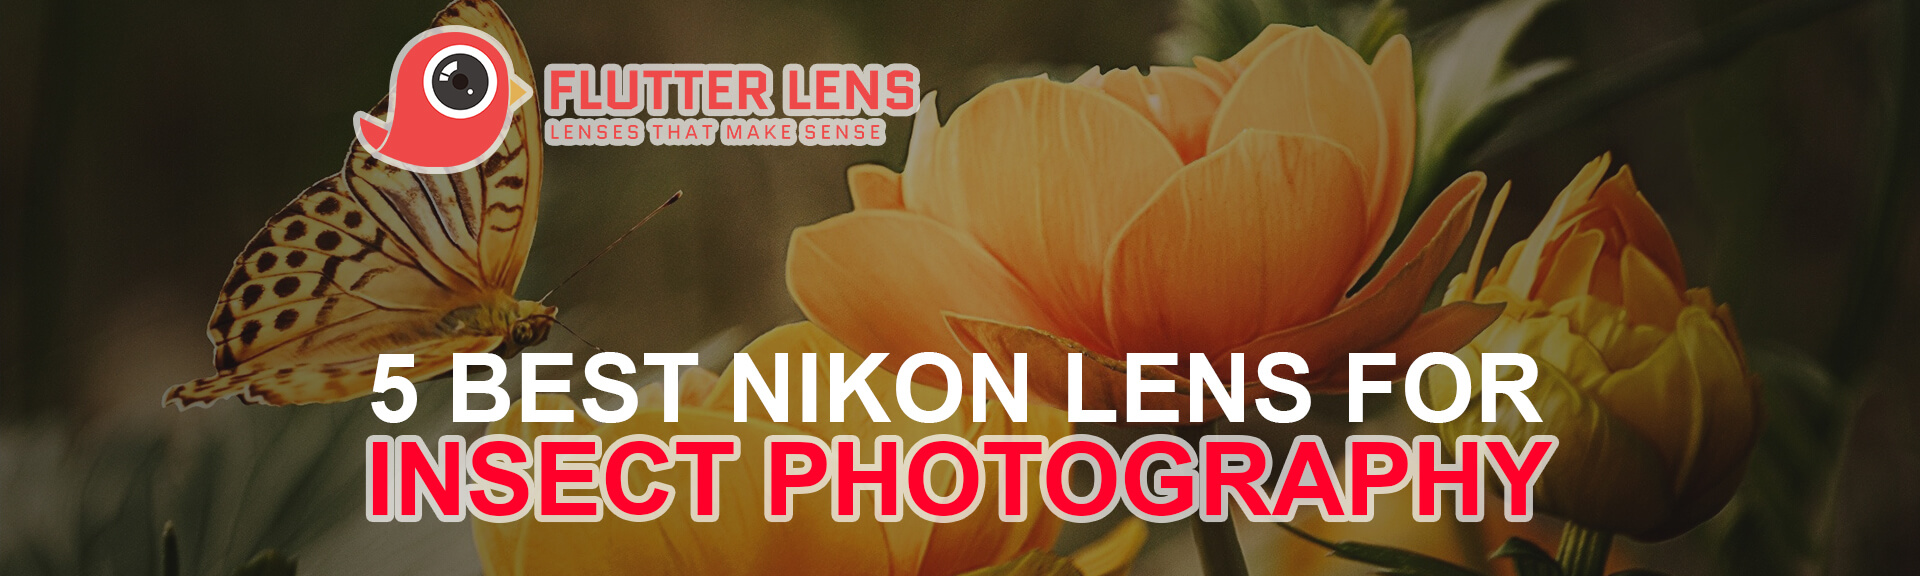 5 Best Nikon Lens for Insect Photography